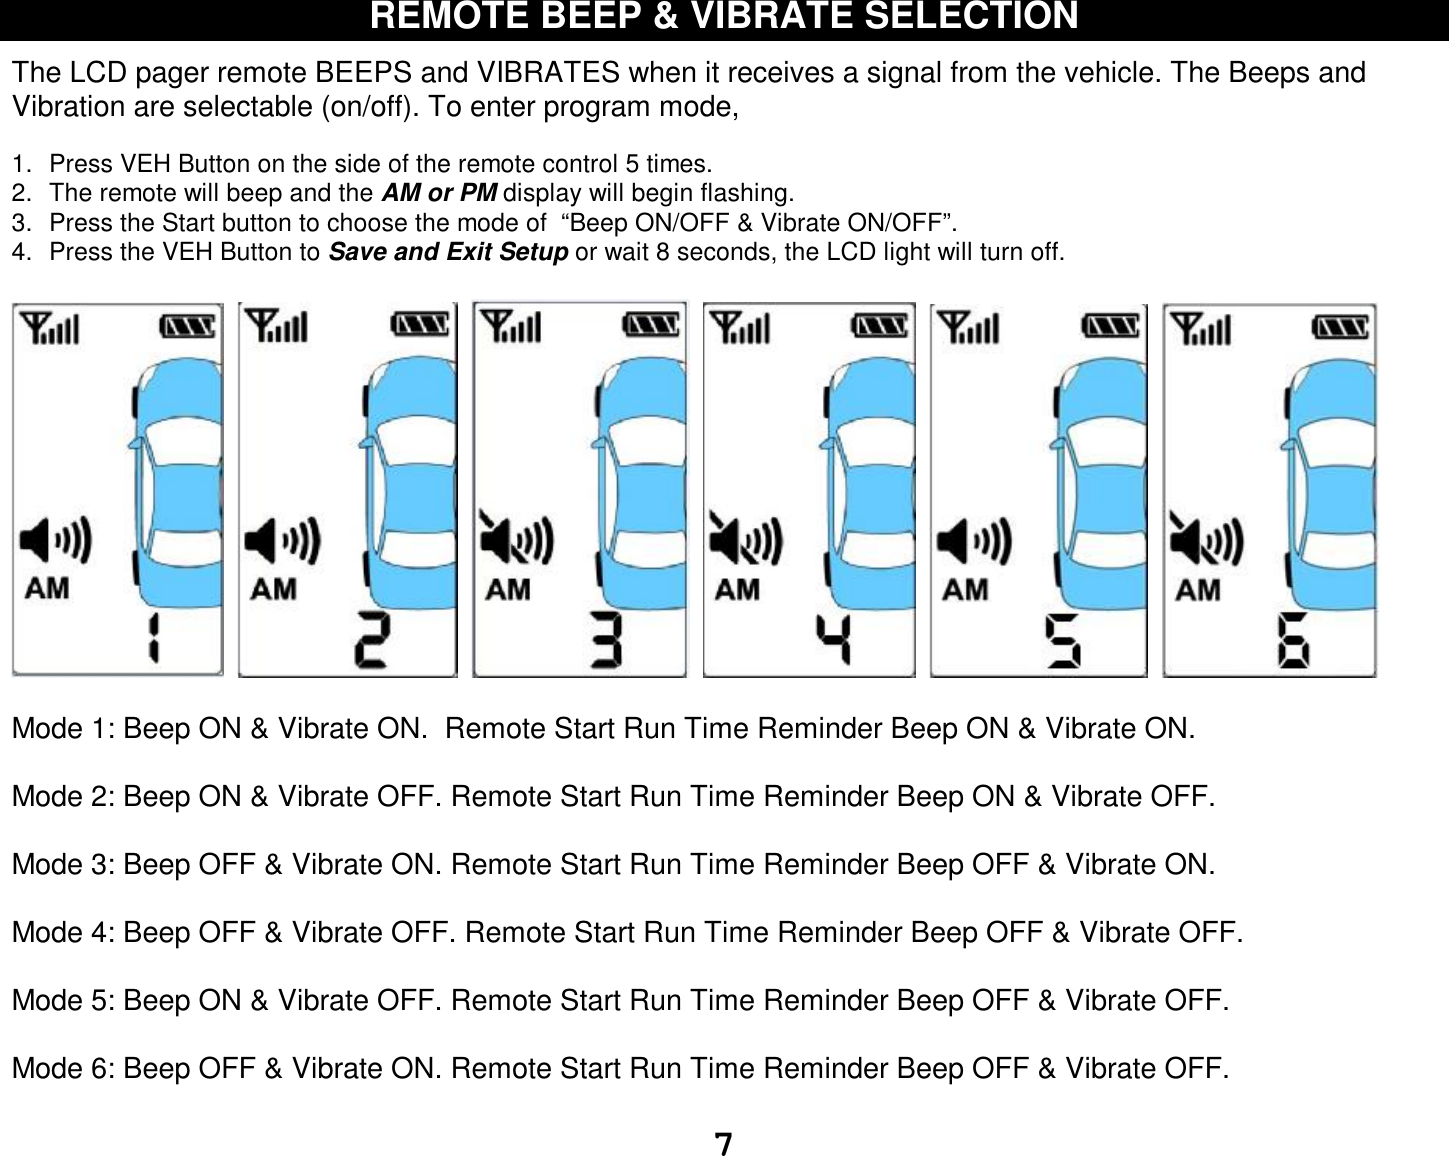  7 REMOTE BEEP &amp; VIBRATE SELECTION  The LCD pager remote BEEPS and VIBRATES when it receives a signal from the vehicle. The Beeps and Vibration are selectable (on/off). To enter program mode,  1. Press VEH Button on the side of the remote control 5 times. 2. The remote will beep and the AM or PM display will begin flashing. 3. Press the Start button to choose the mode of  “Beep ON/OFF &amp; Vibrate ON/OFF”. 4. Press the VEH Button to Save and Exit Setup or wait 8 seconds, the LCD light will turn off.                   Mode 1: Beep ON &amp; Vibrate ON.  Remote Start Run Time Reminder Beep ON &amp; Vibrate ON.  Mode 2: Beep ON &amp; Vibrate OFF. Remote Start Run Time Reminder Beep ON &amp; Vibrate OFF.  Mode 3: Beep OFF &amp; Vibrate ON. Remote Start Run Time Reminder Beep OFF &amp; Vibrate ON.   Mode 4: Beep OFF &amp; Vibrate OFF. Remote Start Run Time Reminder Beep OFF &amp; Vibrate OFF.   Mode 5: Beep ON &amp; Vibrate OFF. Remote Start Run Time Reminder Beep OFF &amp; Vibrate OFF.  Mode 6: Beep OFF &amp; Vibrate ON. Remote Start Run Time Reminder Beep OFF &amp; Vibrate OFF.  